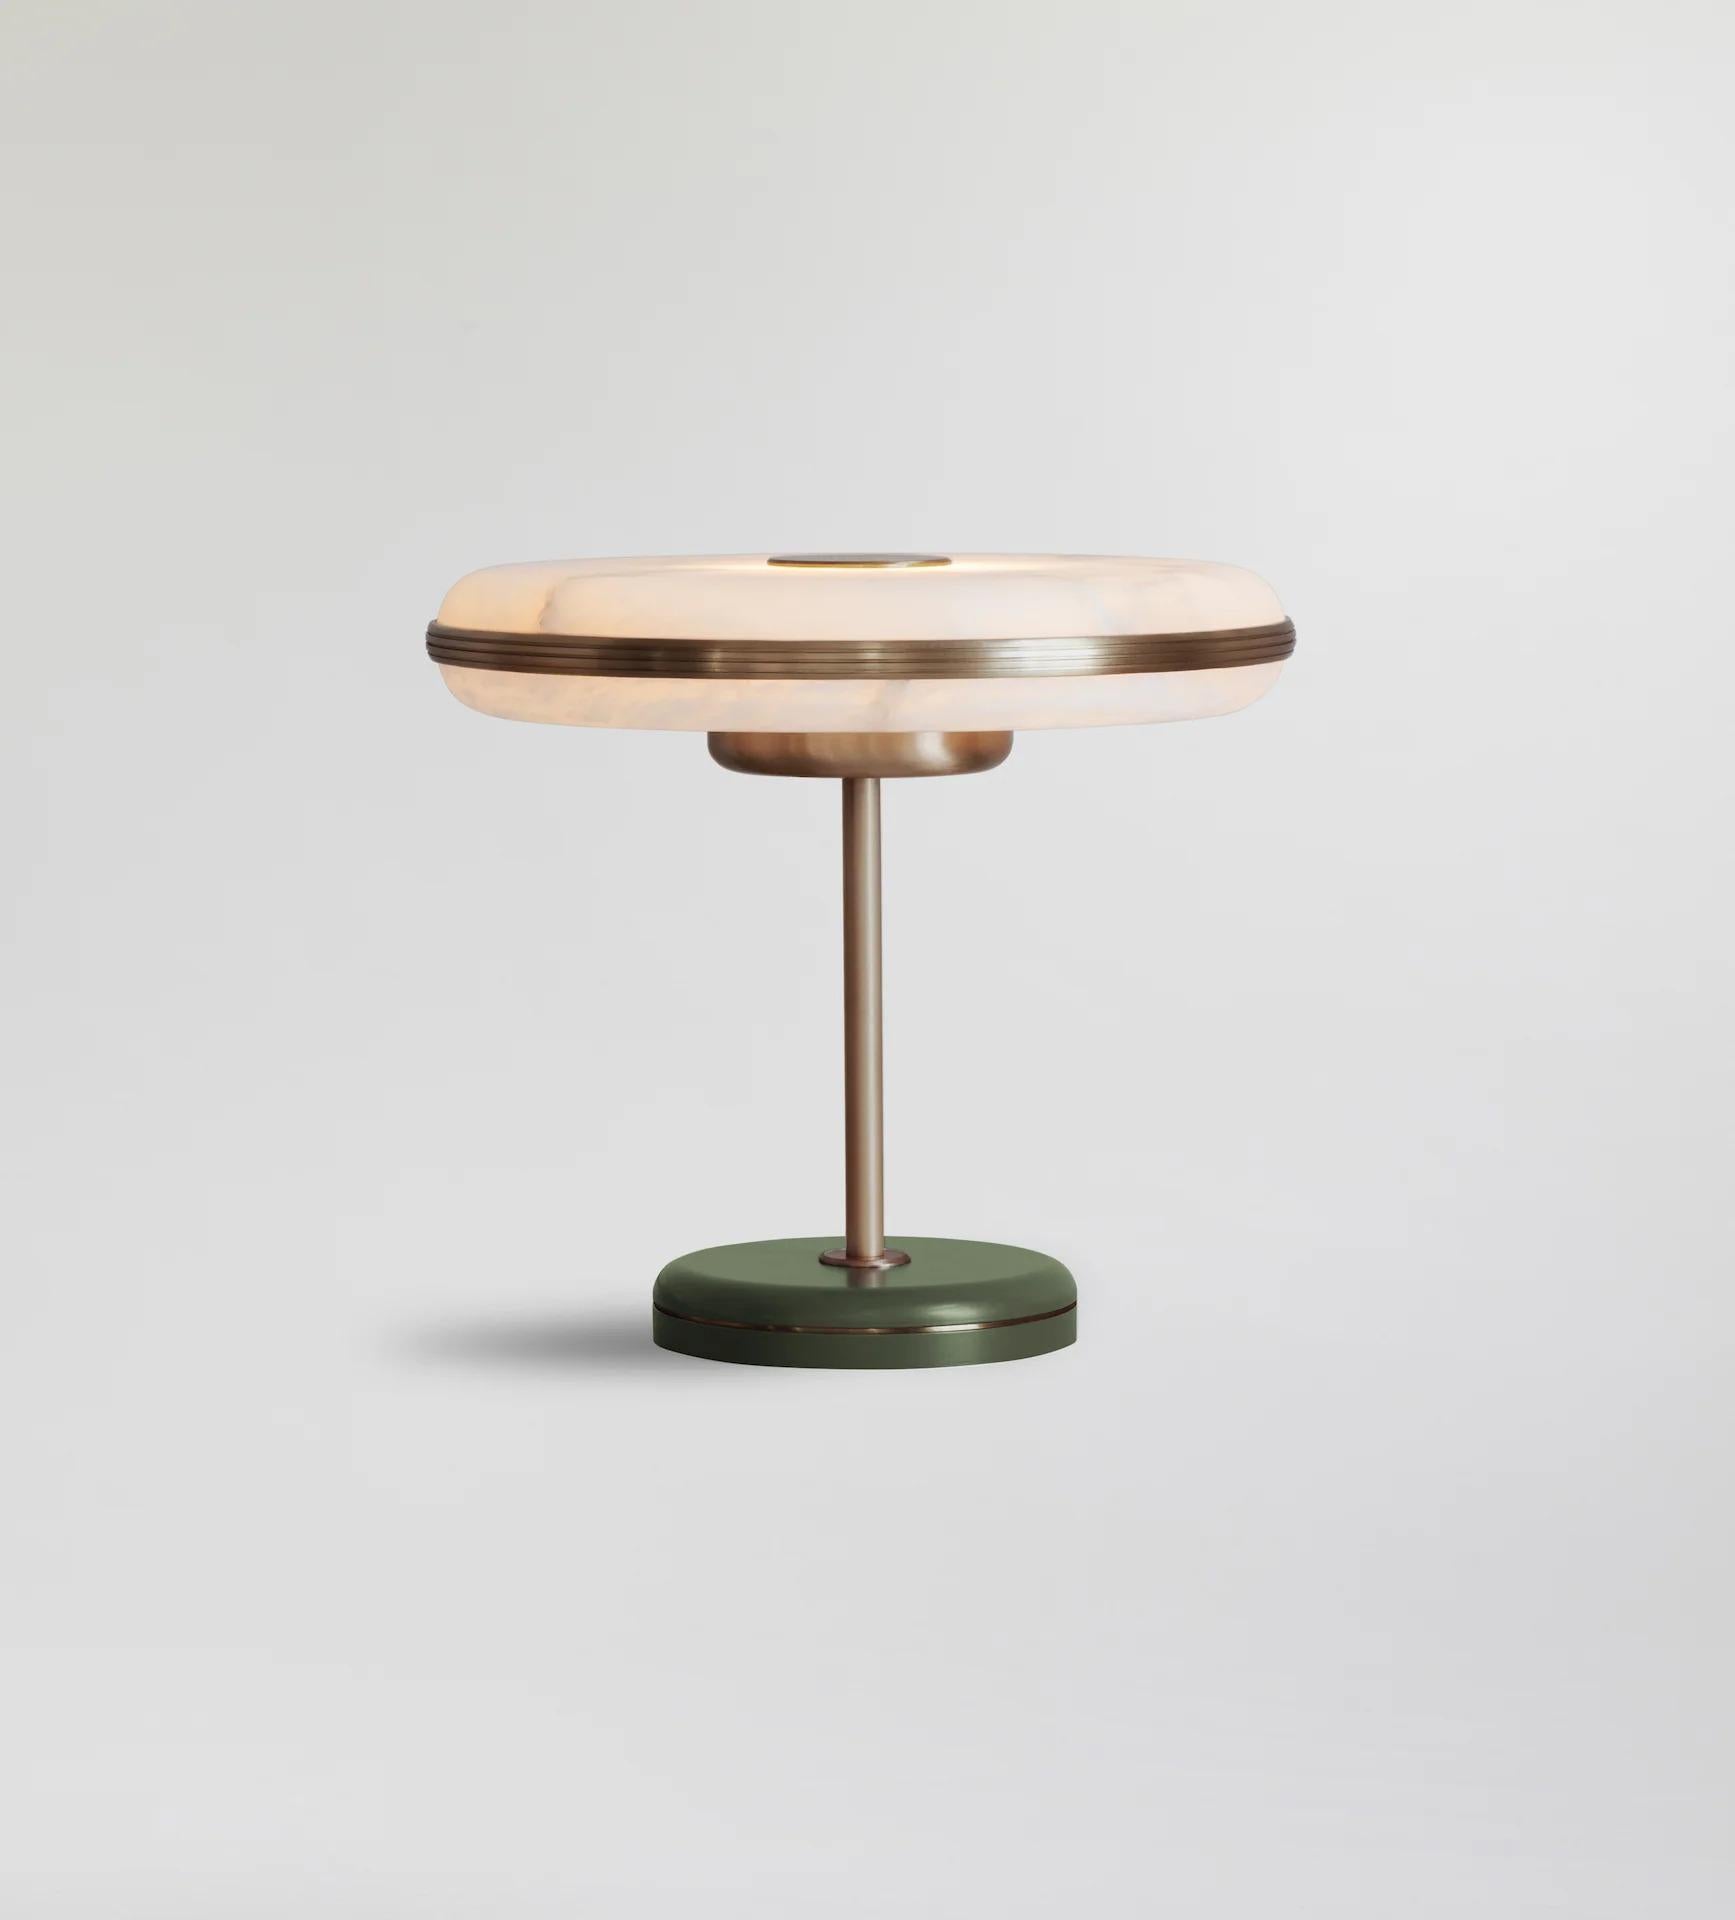 Beran Antique Brass Large Table Lamp by Bert Frank
Dimensions: Ø 36 x H 32 cm.
Materials: Brass and alabaster.
Base finish: Olive.

Available in two different sizes. Available in different finishes and materials. Please contact us. 

The natural